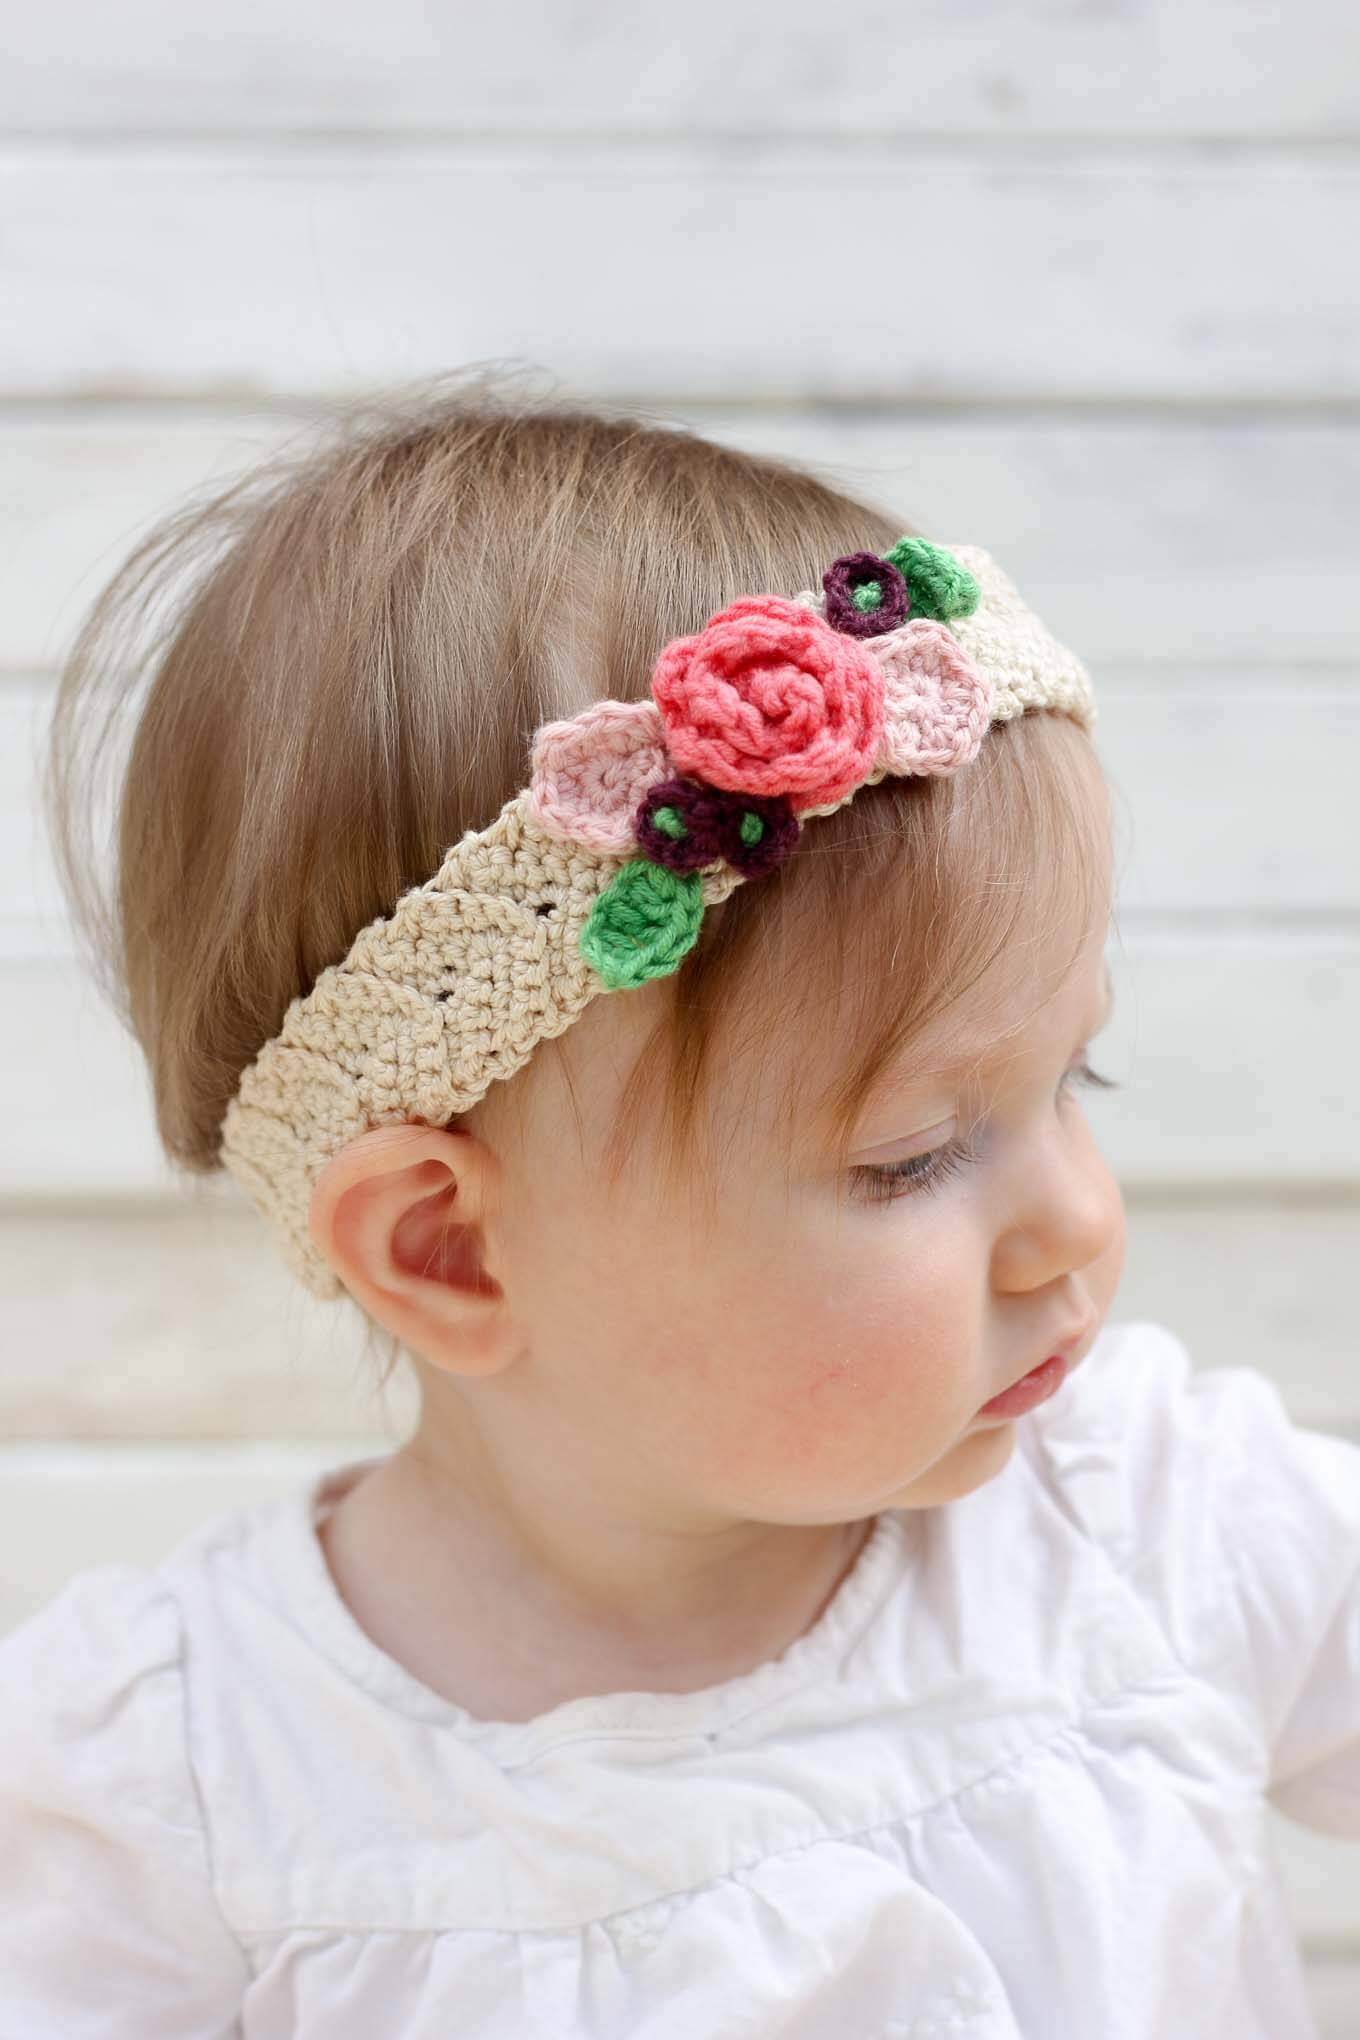 Knitted Headband Patterns With Flower Free Crochet Headband Pattern With Flower Crochet And Knit